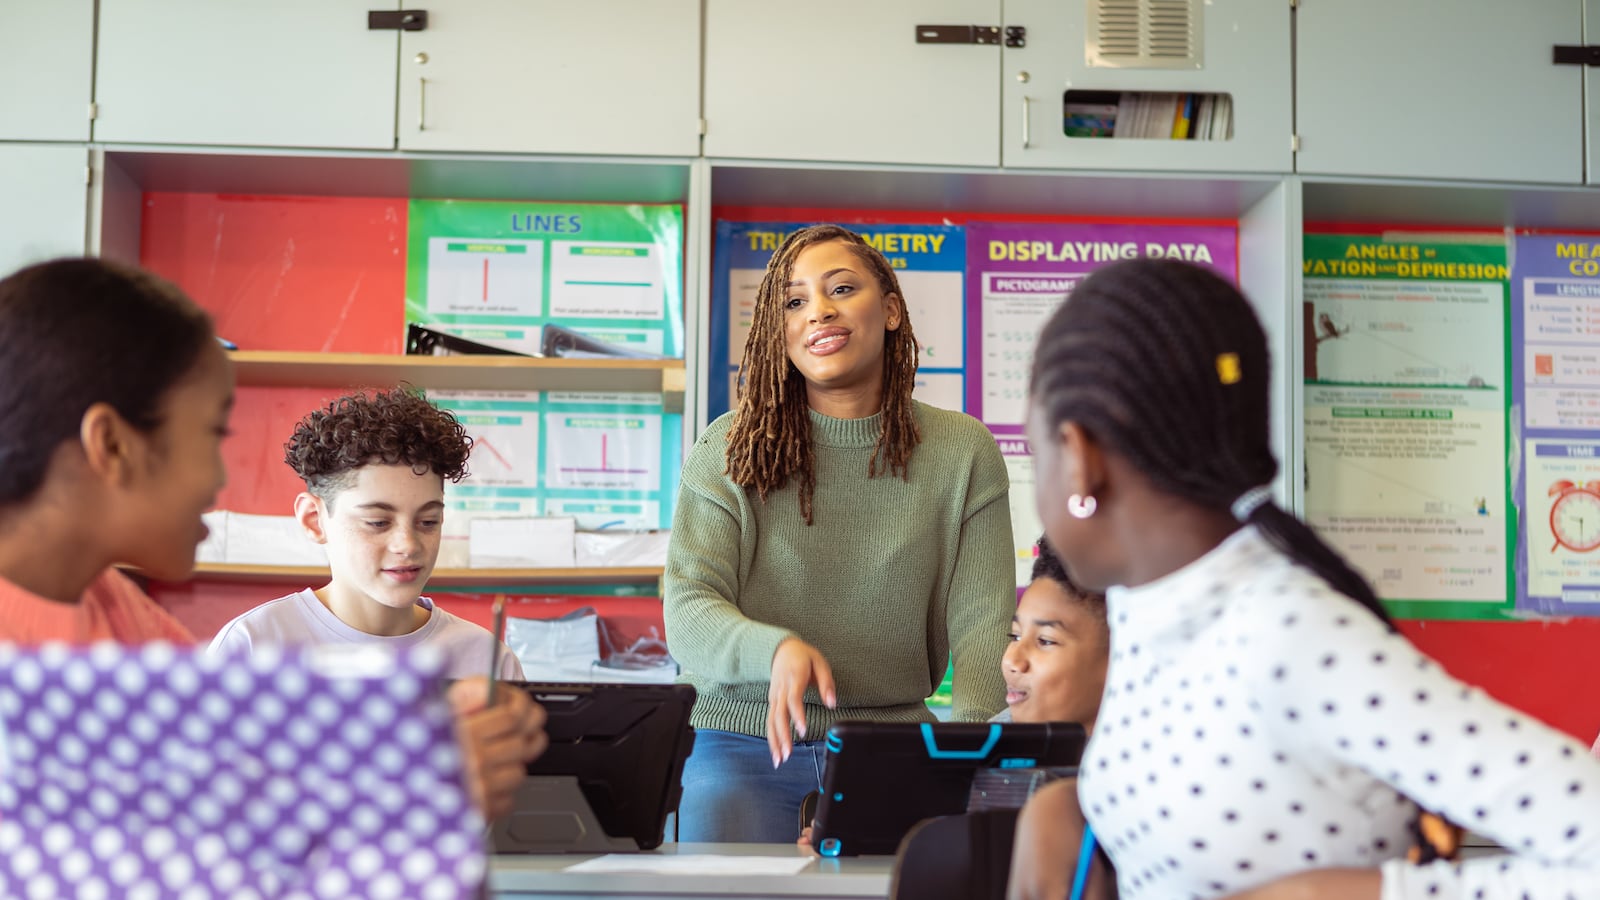 Young woman who is a teacher engages with students in a classroom.